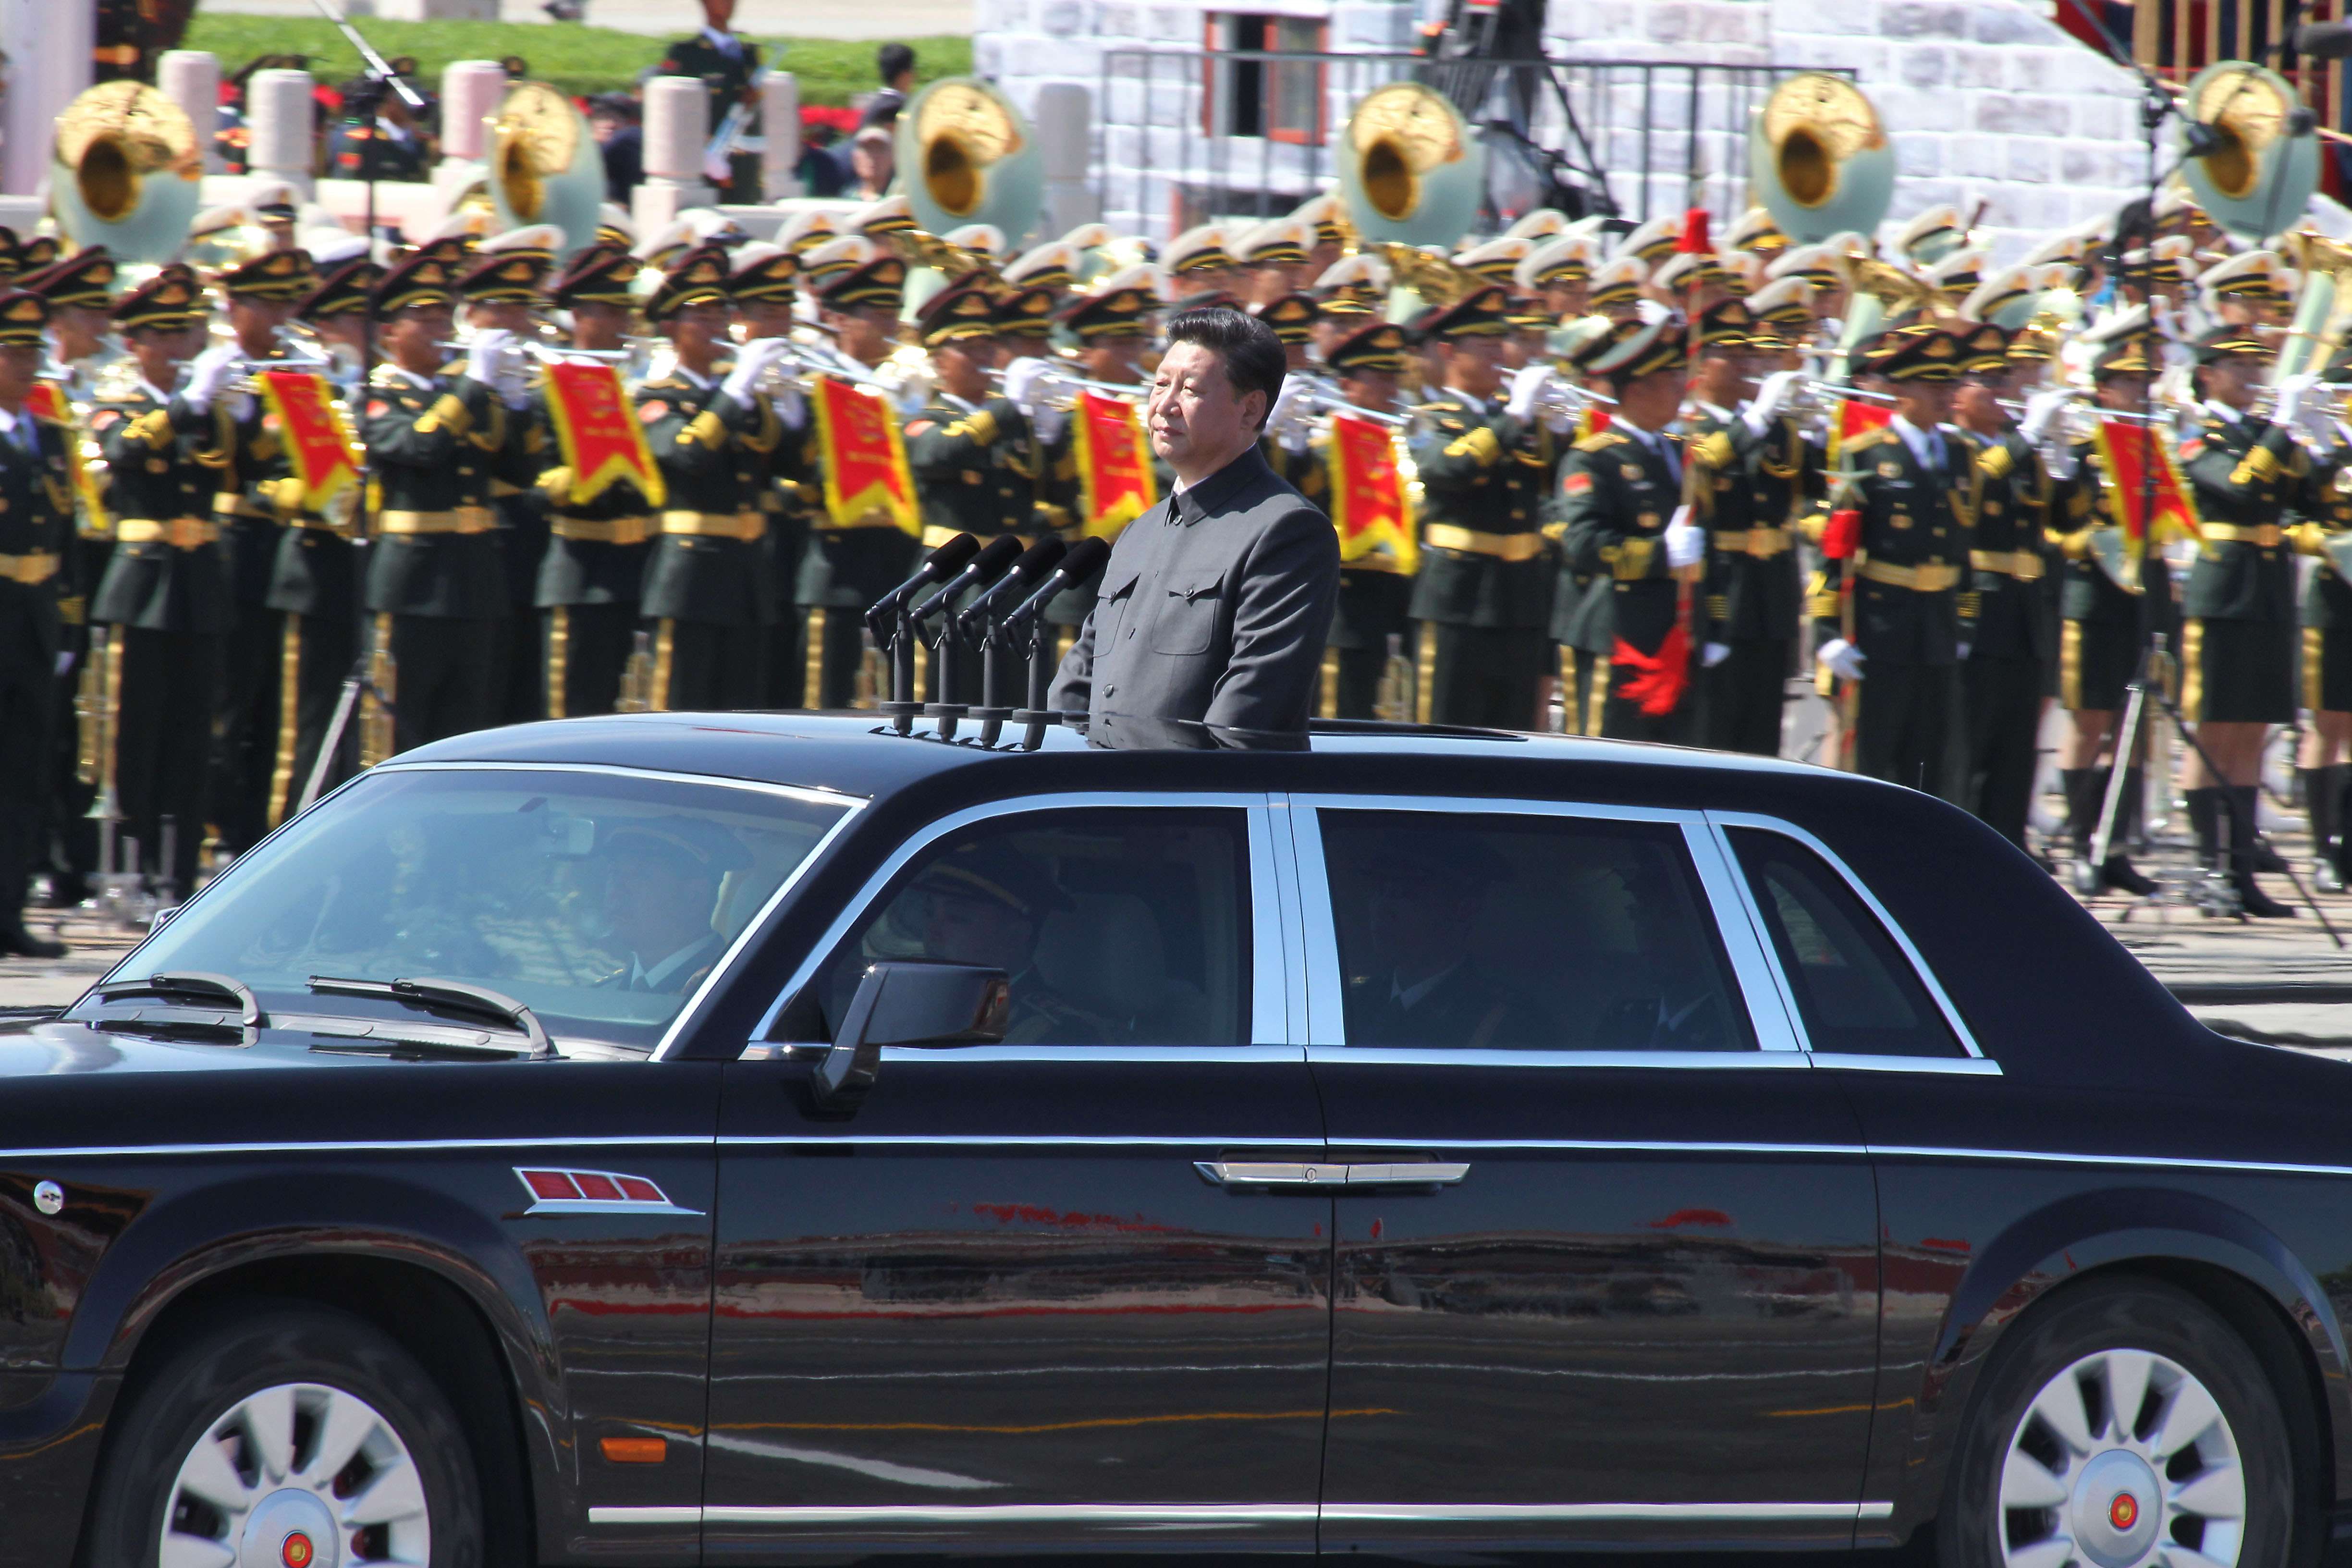 Xi Jinping reviews the parade soldiers at the military parade in Tiananmen Square in Beijing. Photo: Simon Song